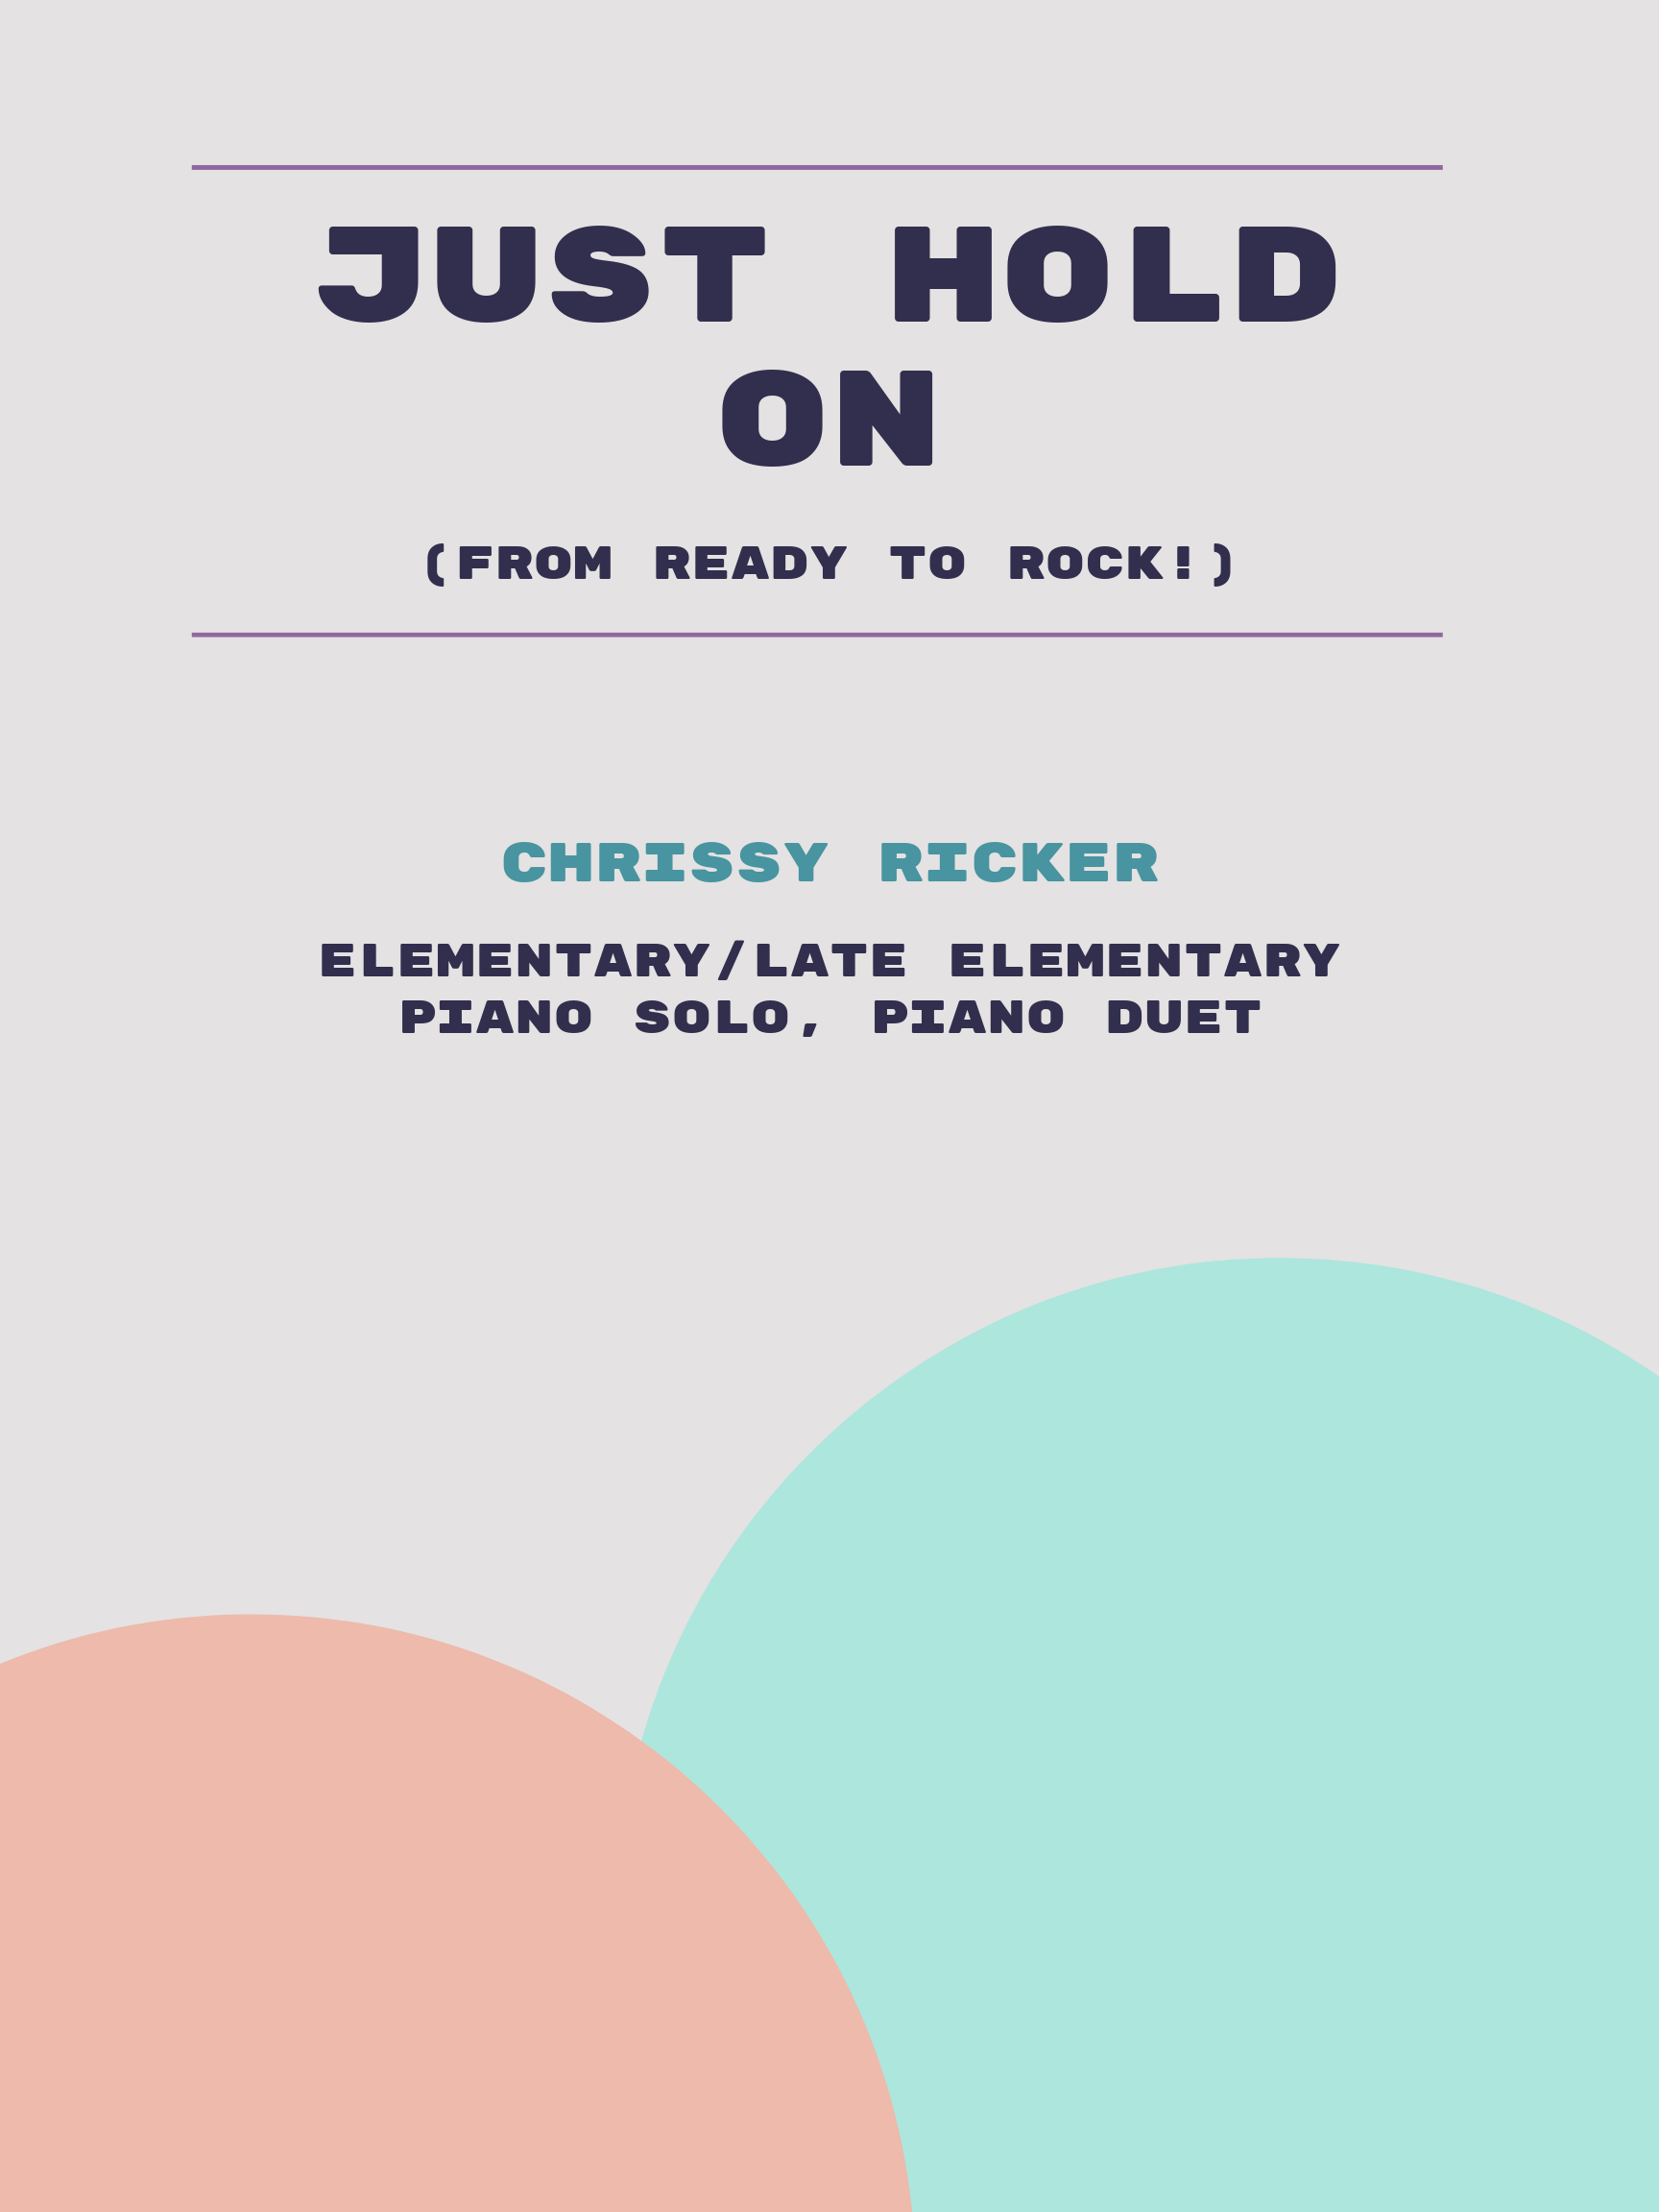 Just Hold On by Chrissy Ricker